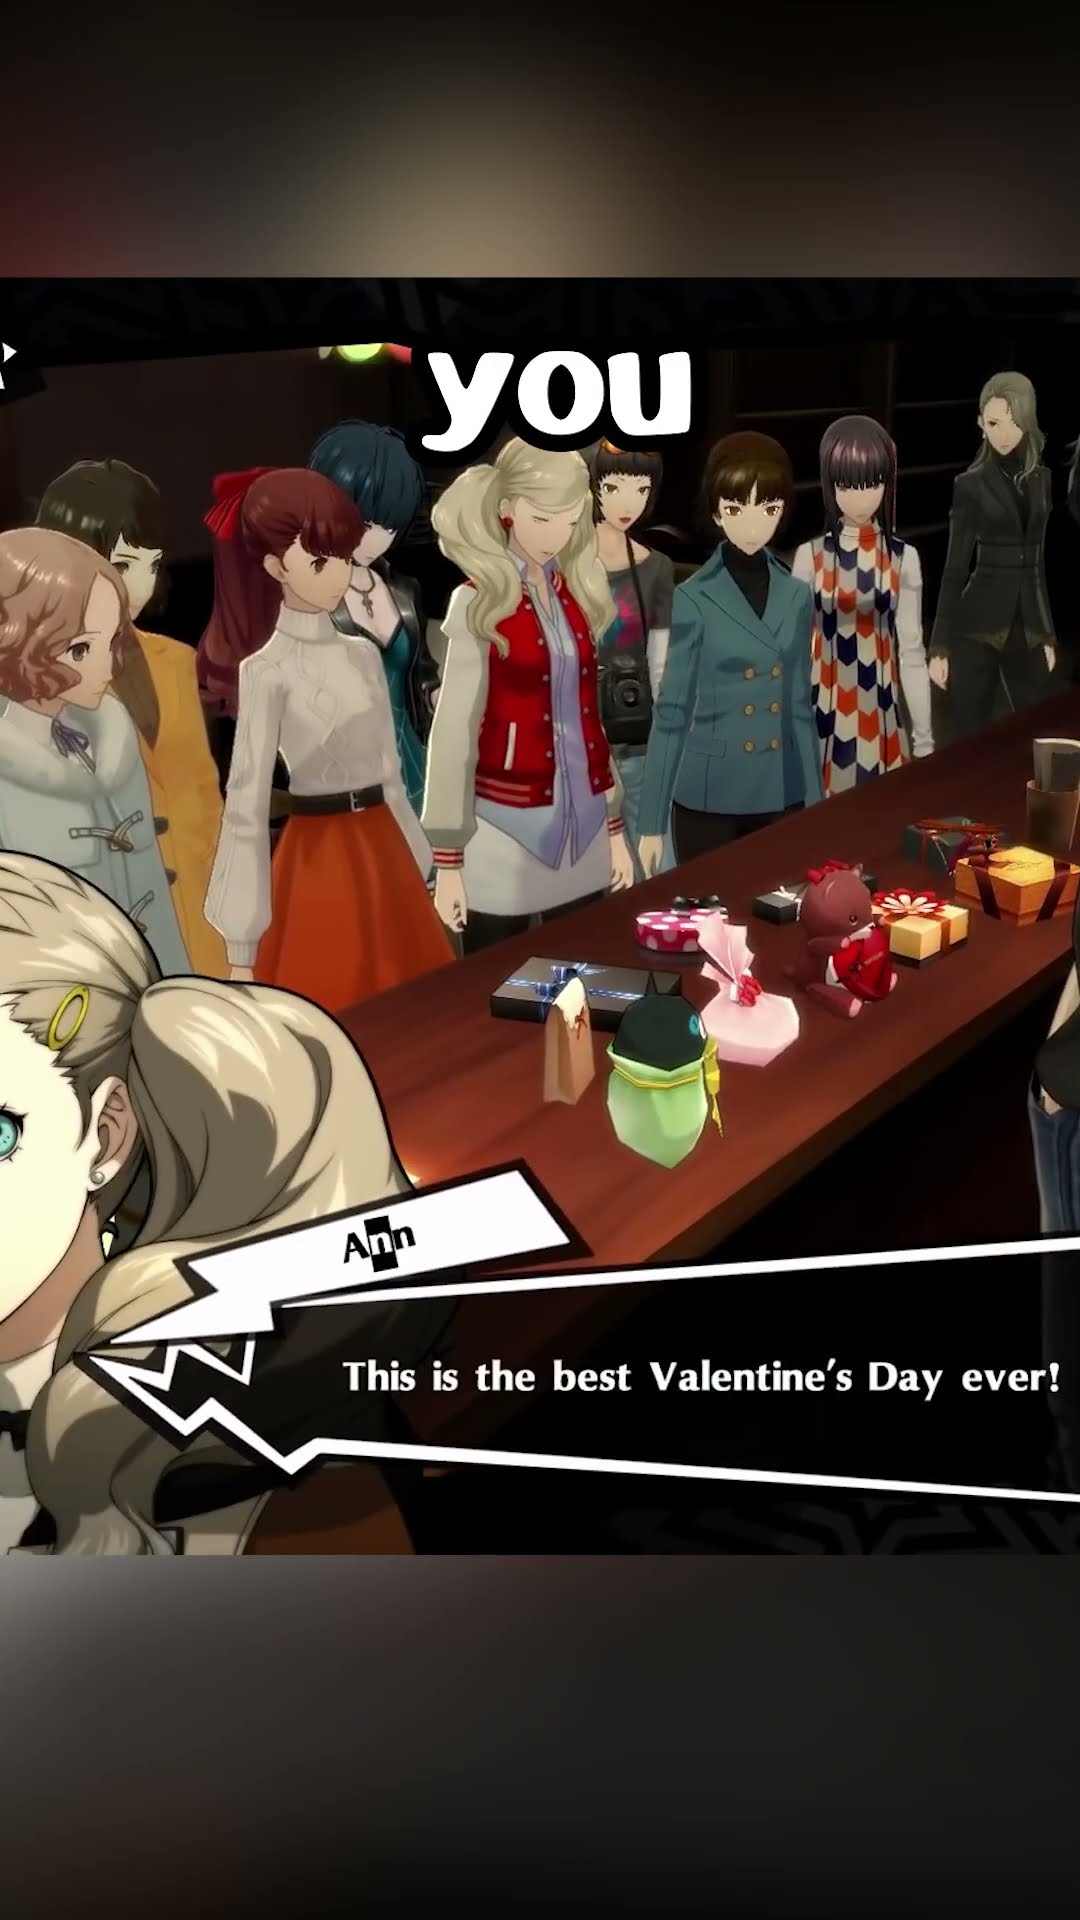 Persona 5 Royal has a CRAZY unused valentine's day event